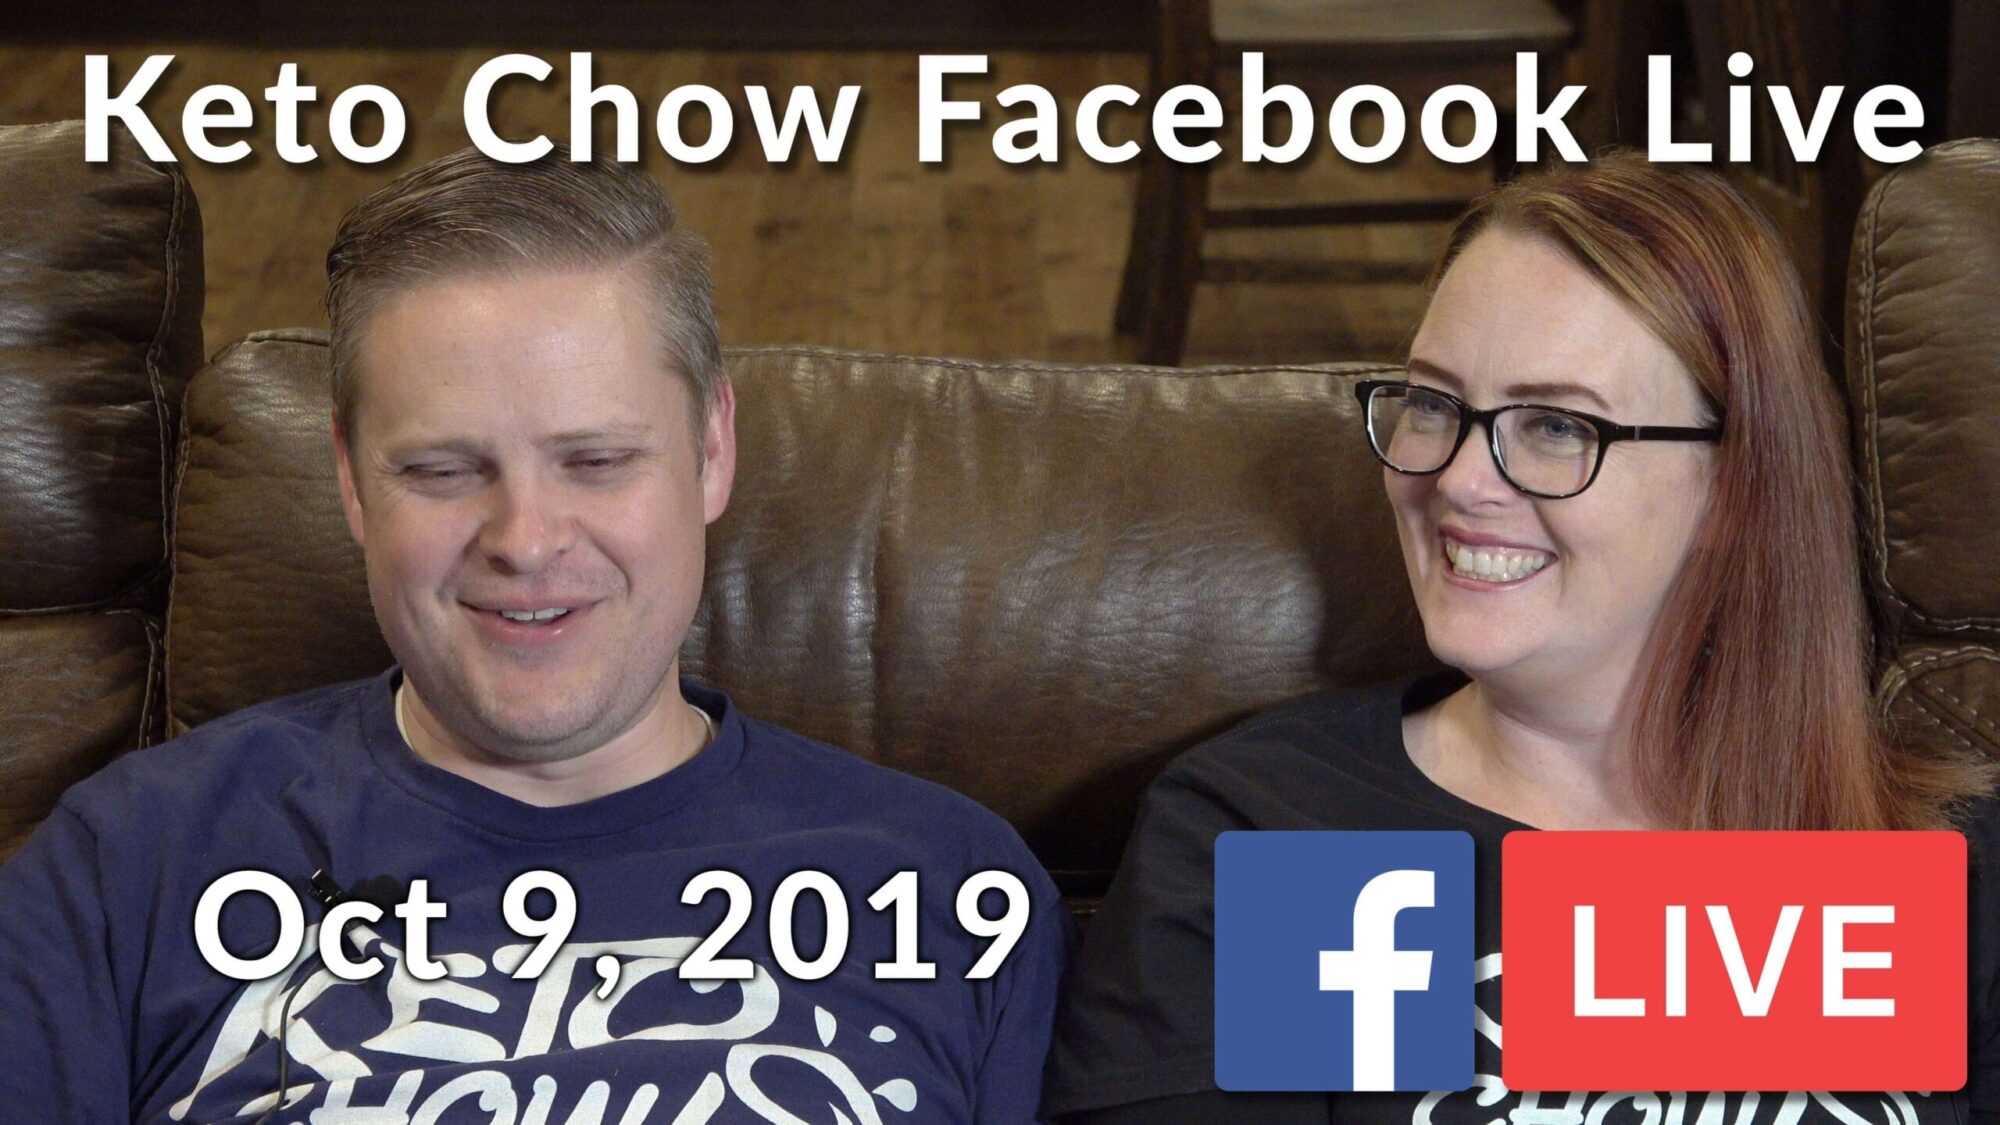 Thumbnail of Keto Chow Facebook Live recording from October 8